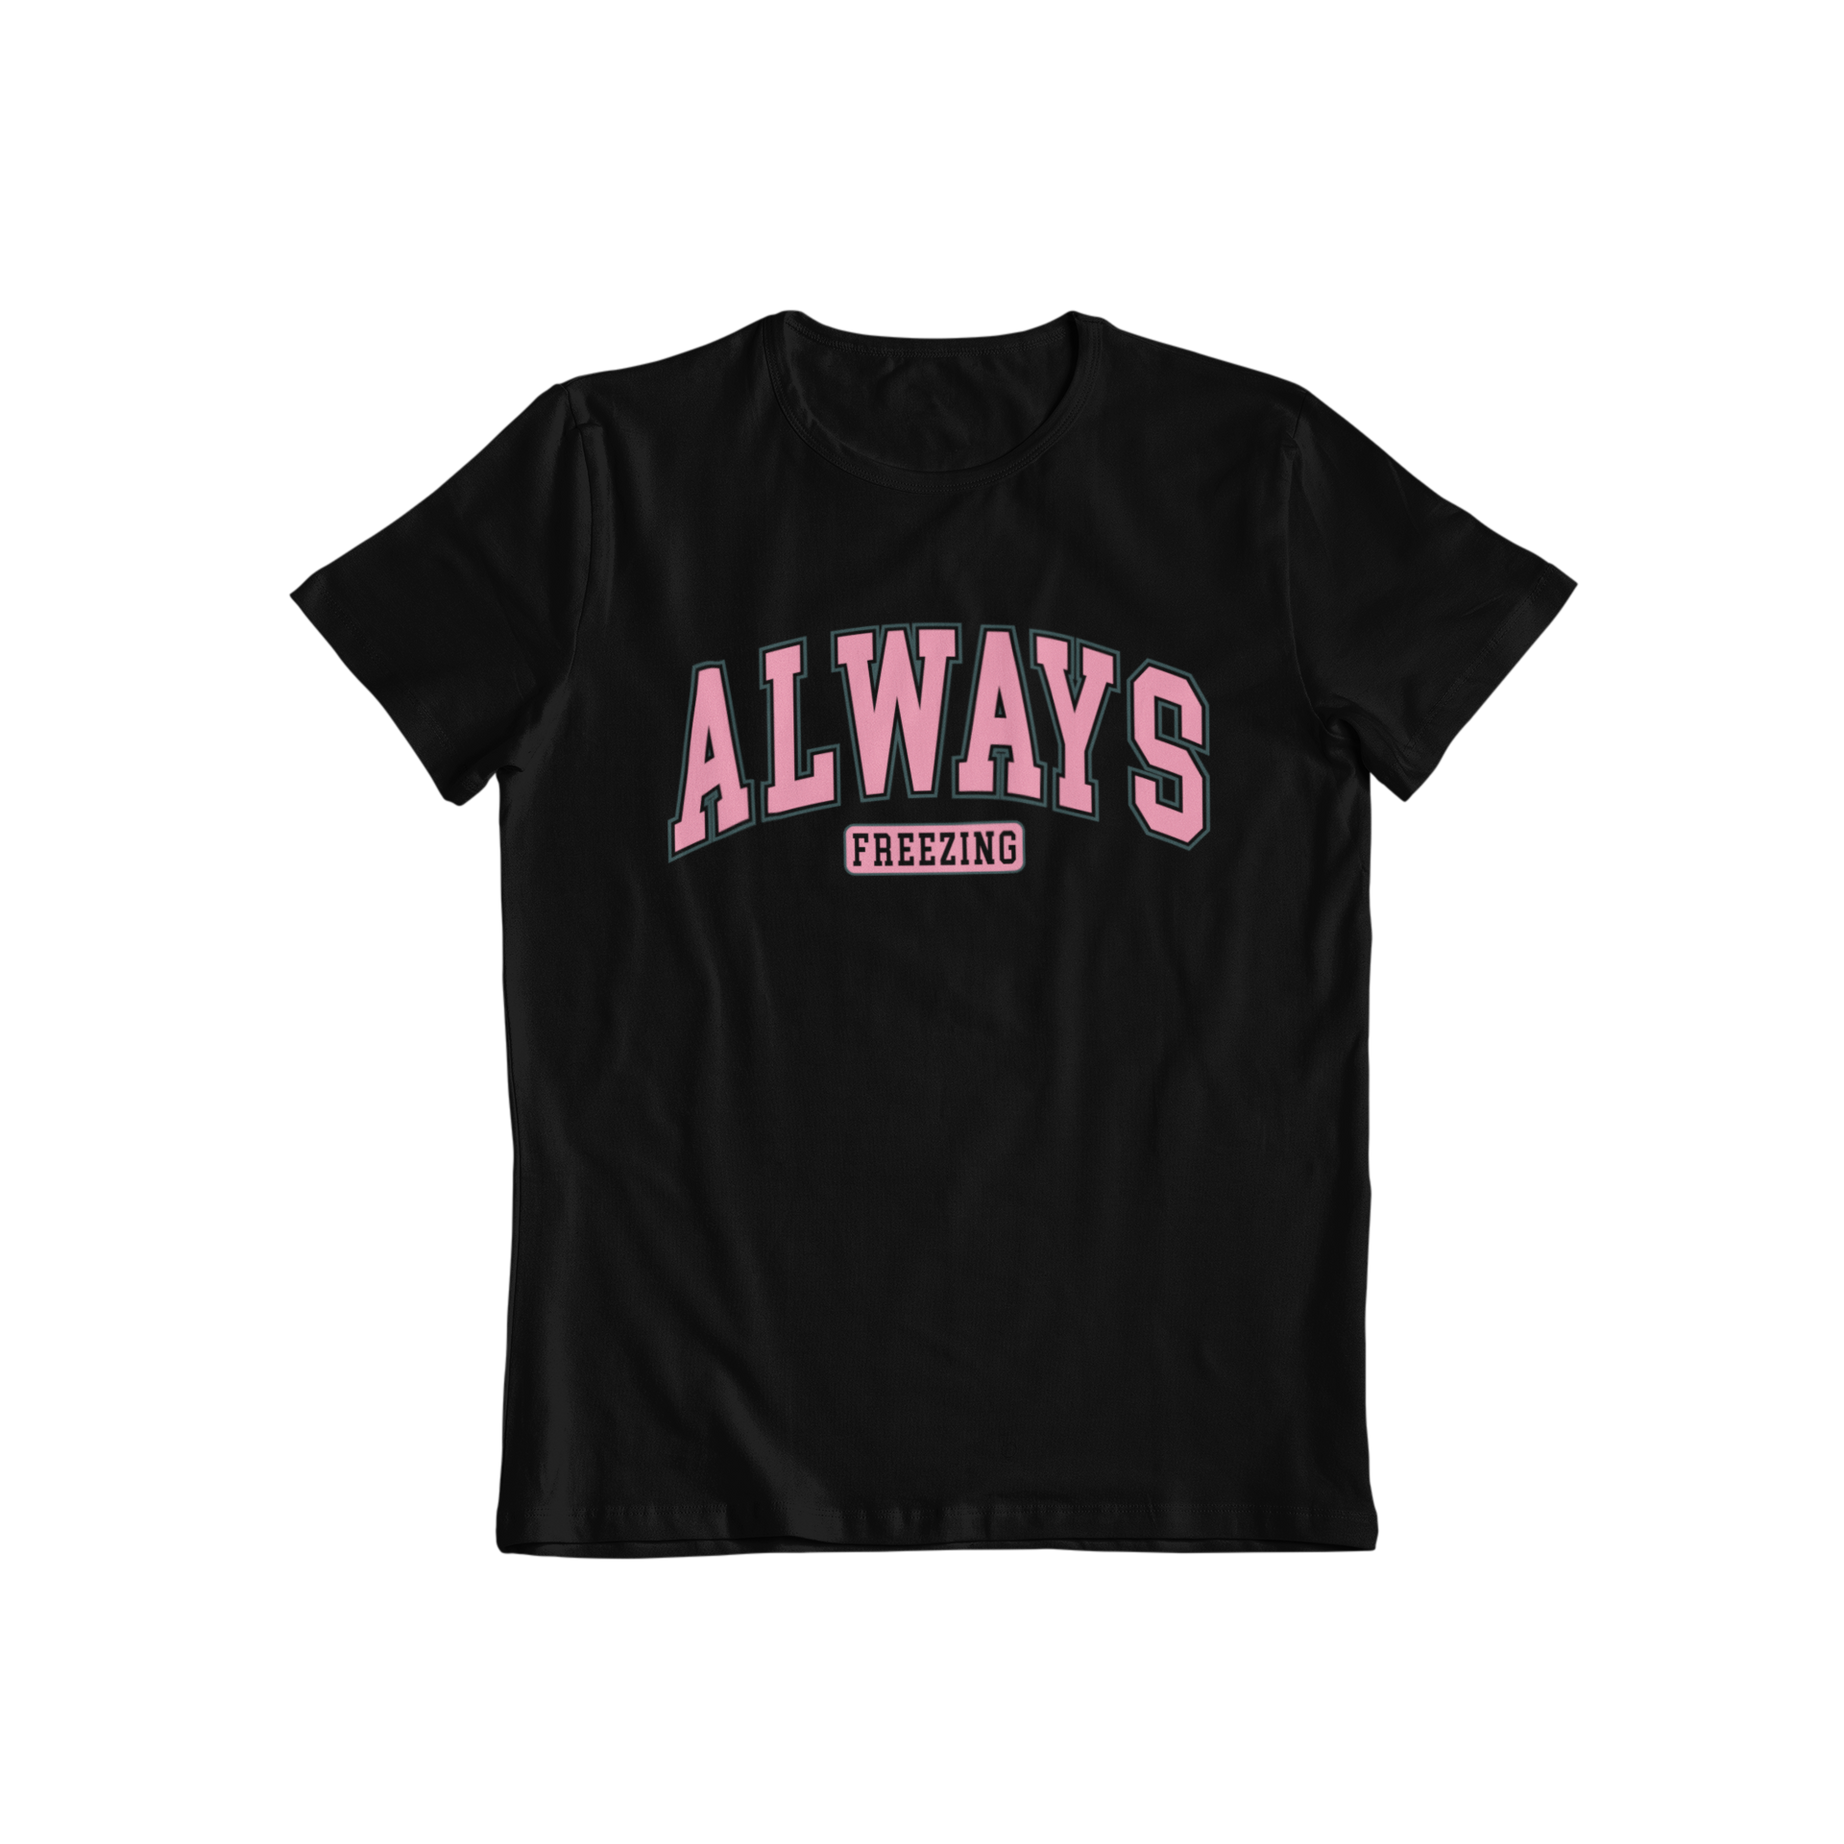 Stay stylish and comfortable with the Always Freezing 2 T-shirt. This slogan T-shirt features a pink print and promises to keep you cool, no matter the temperature outside. Crafted with quality materials, you won't find a better, more reliable t-shirt.